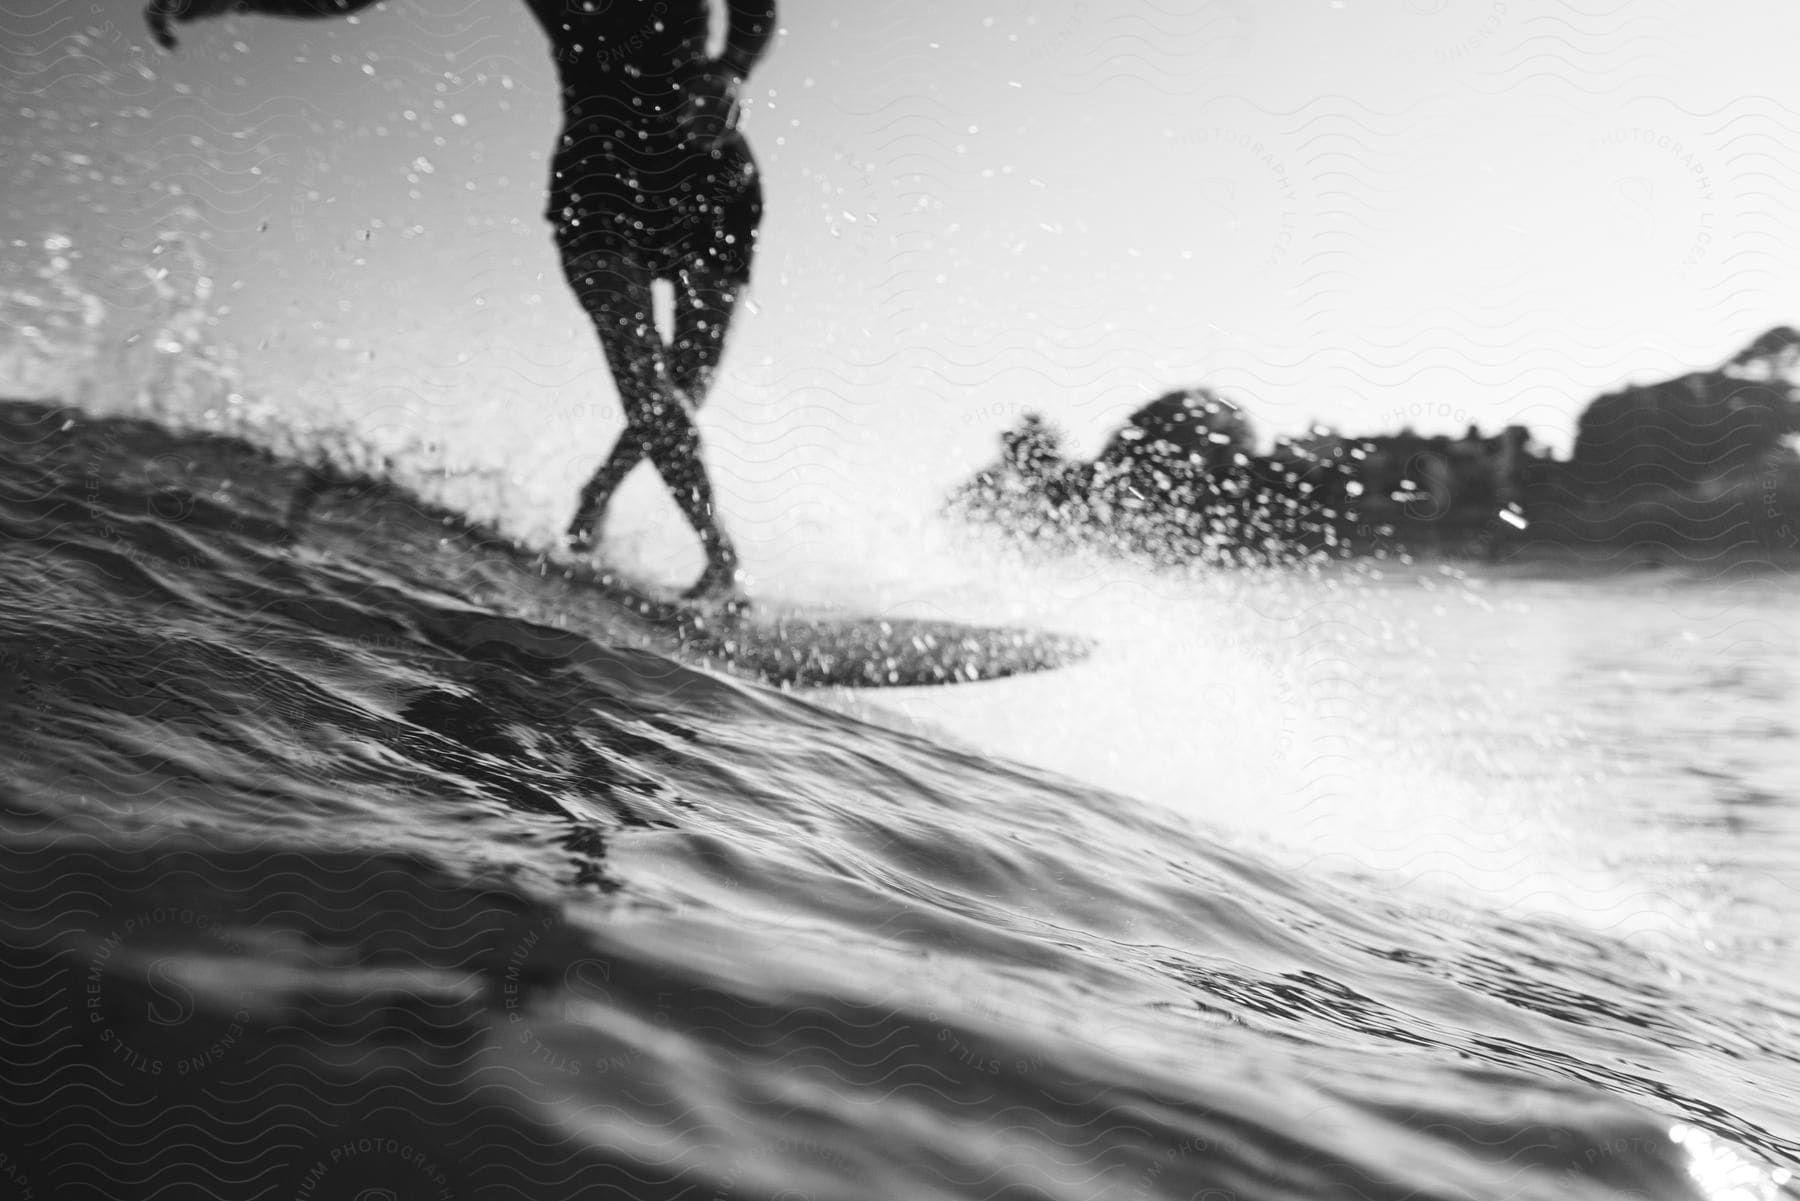 A black-and-white photo of a surfer catching a wave with splashes of water.